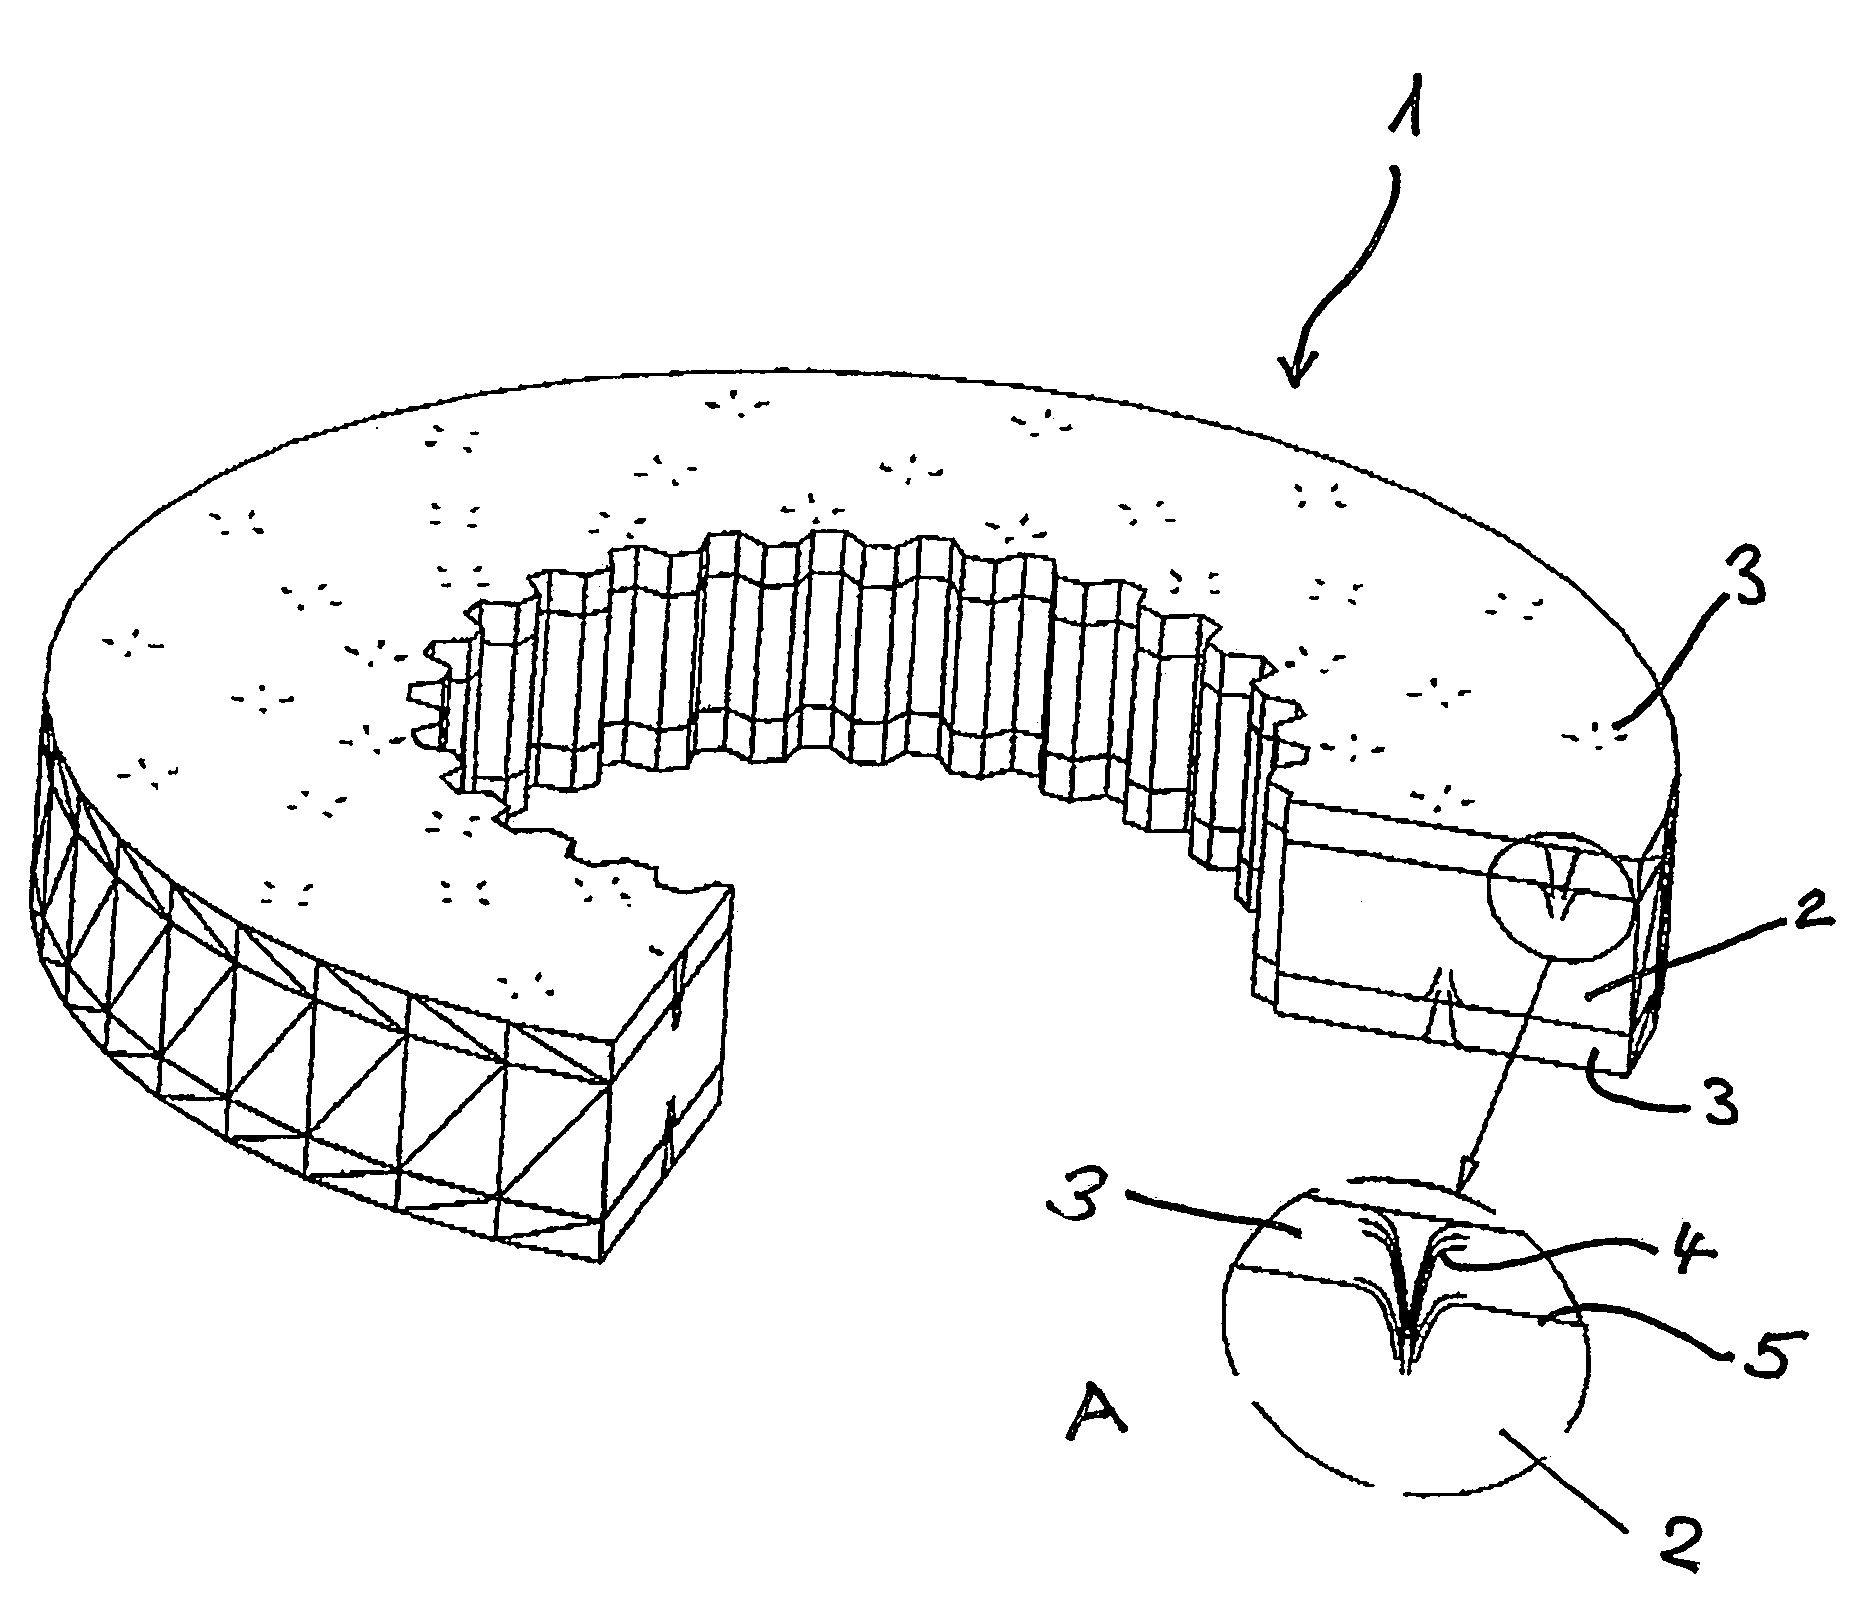 One-piece friction body with a support and a friction pad disposed thereon and method of its manufacture